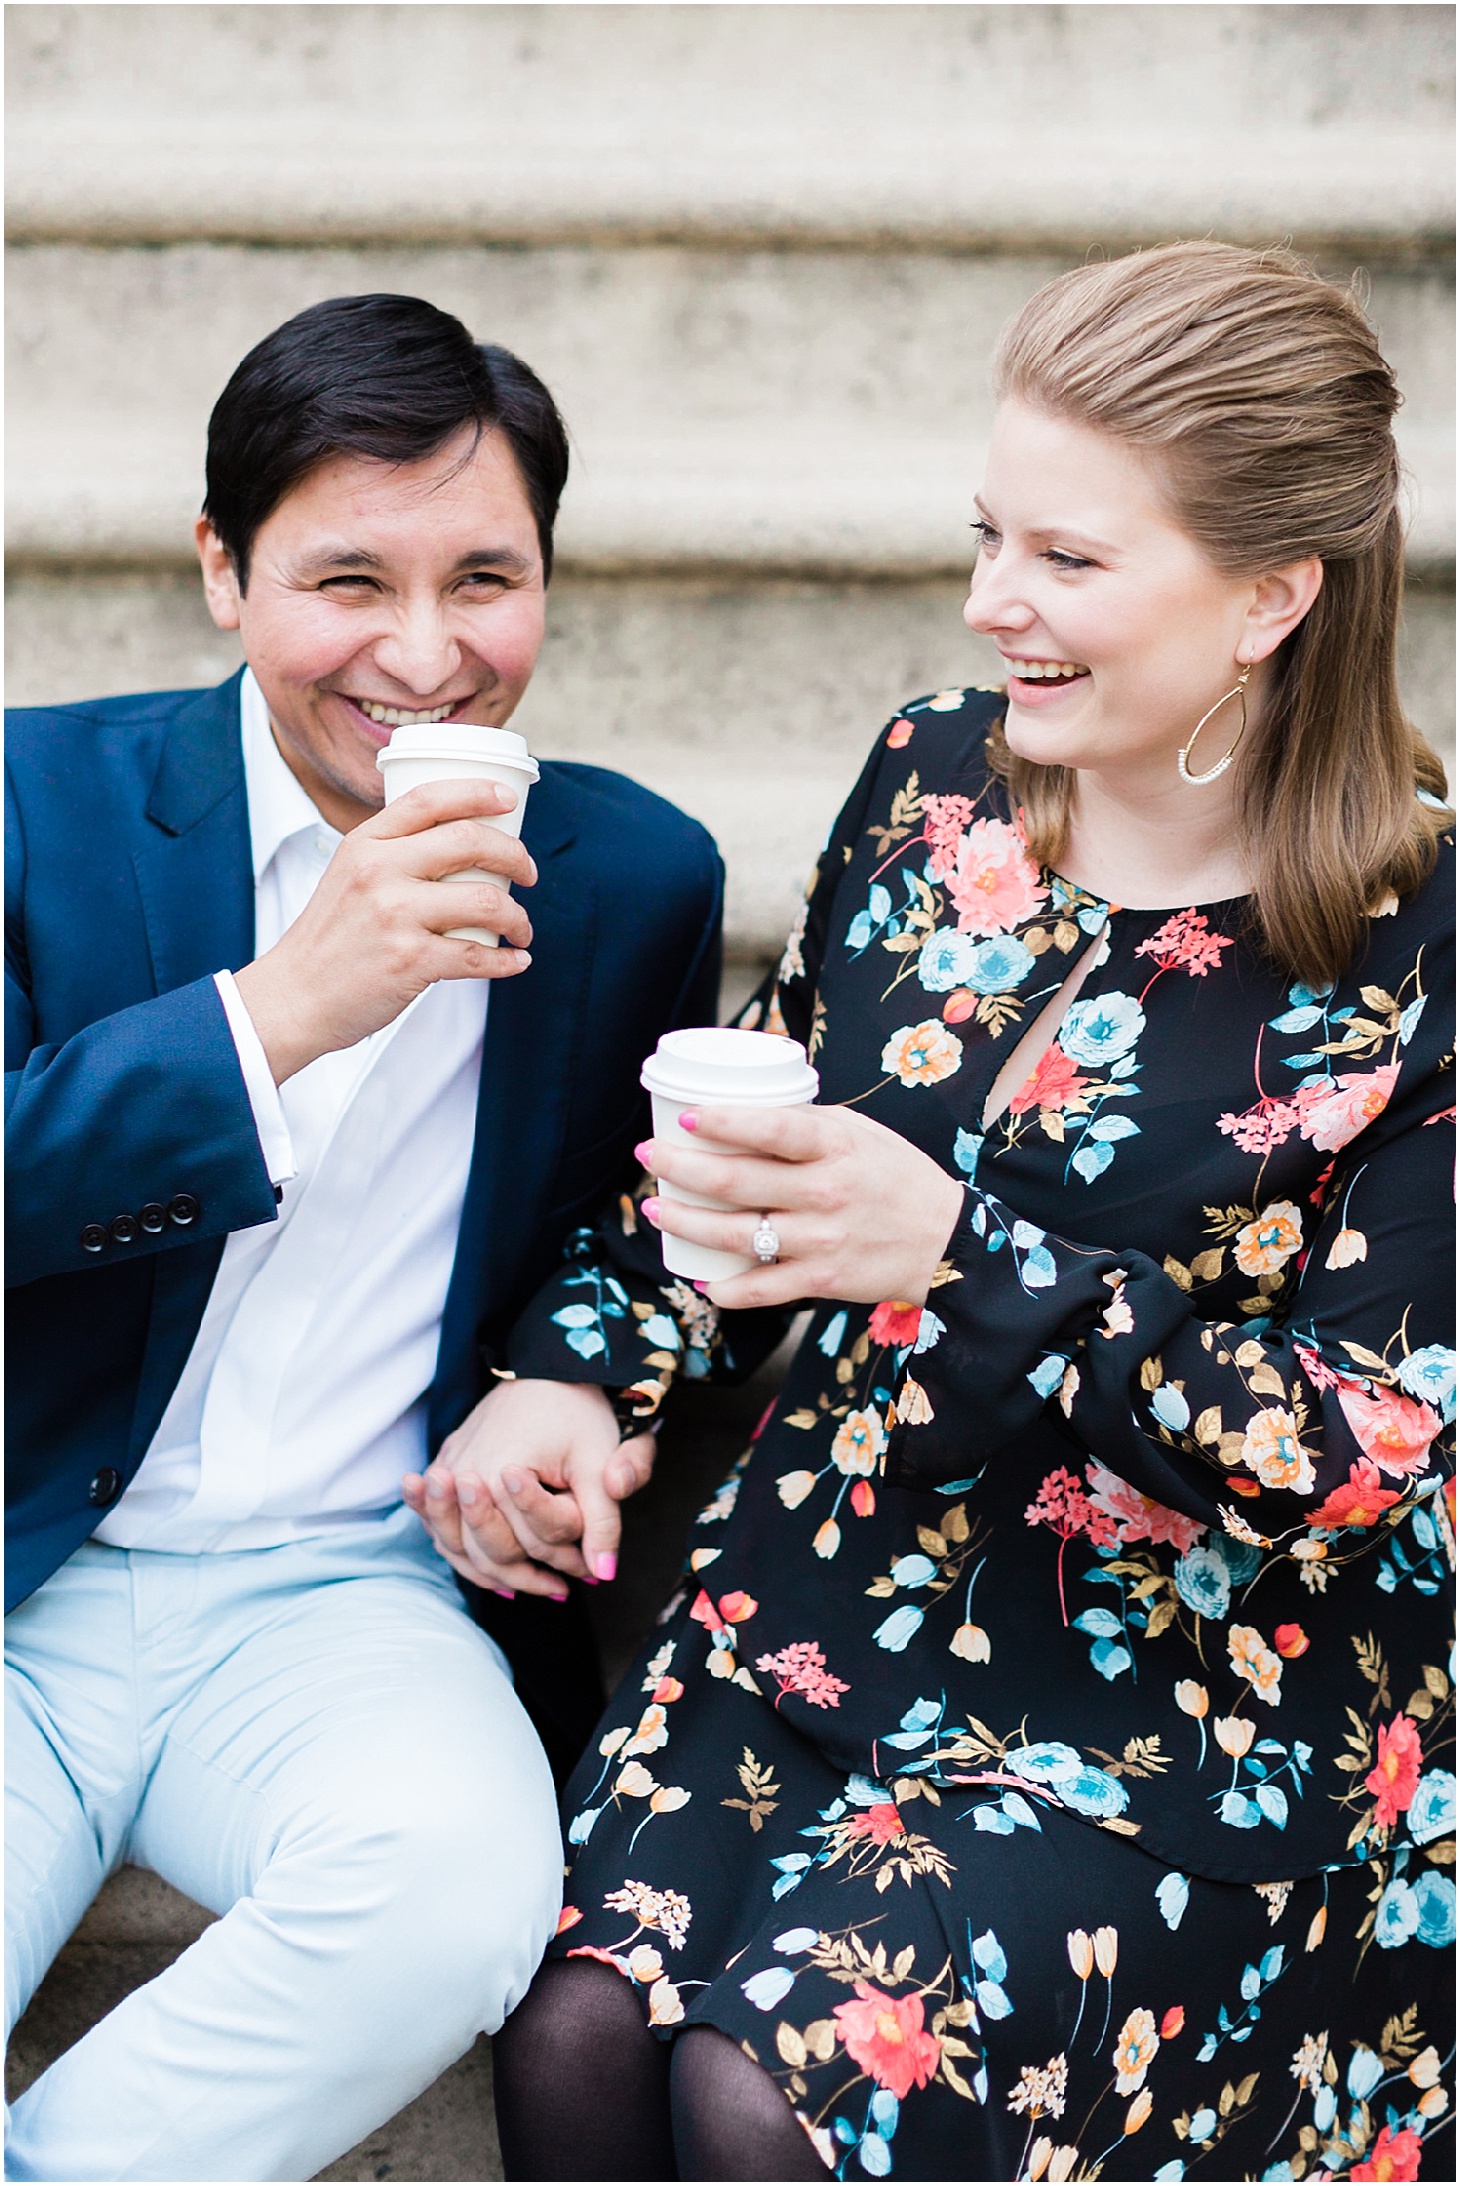 Engagement Portraits on Brownstone in NYC, Springtime Engagement in Queens NYC, Sarah Bradshaw Photography